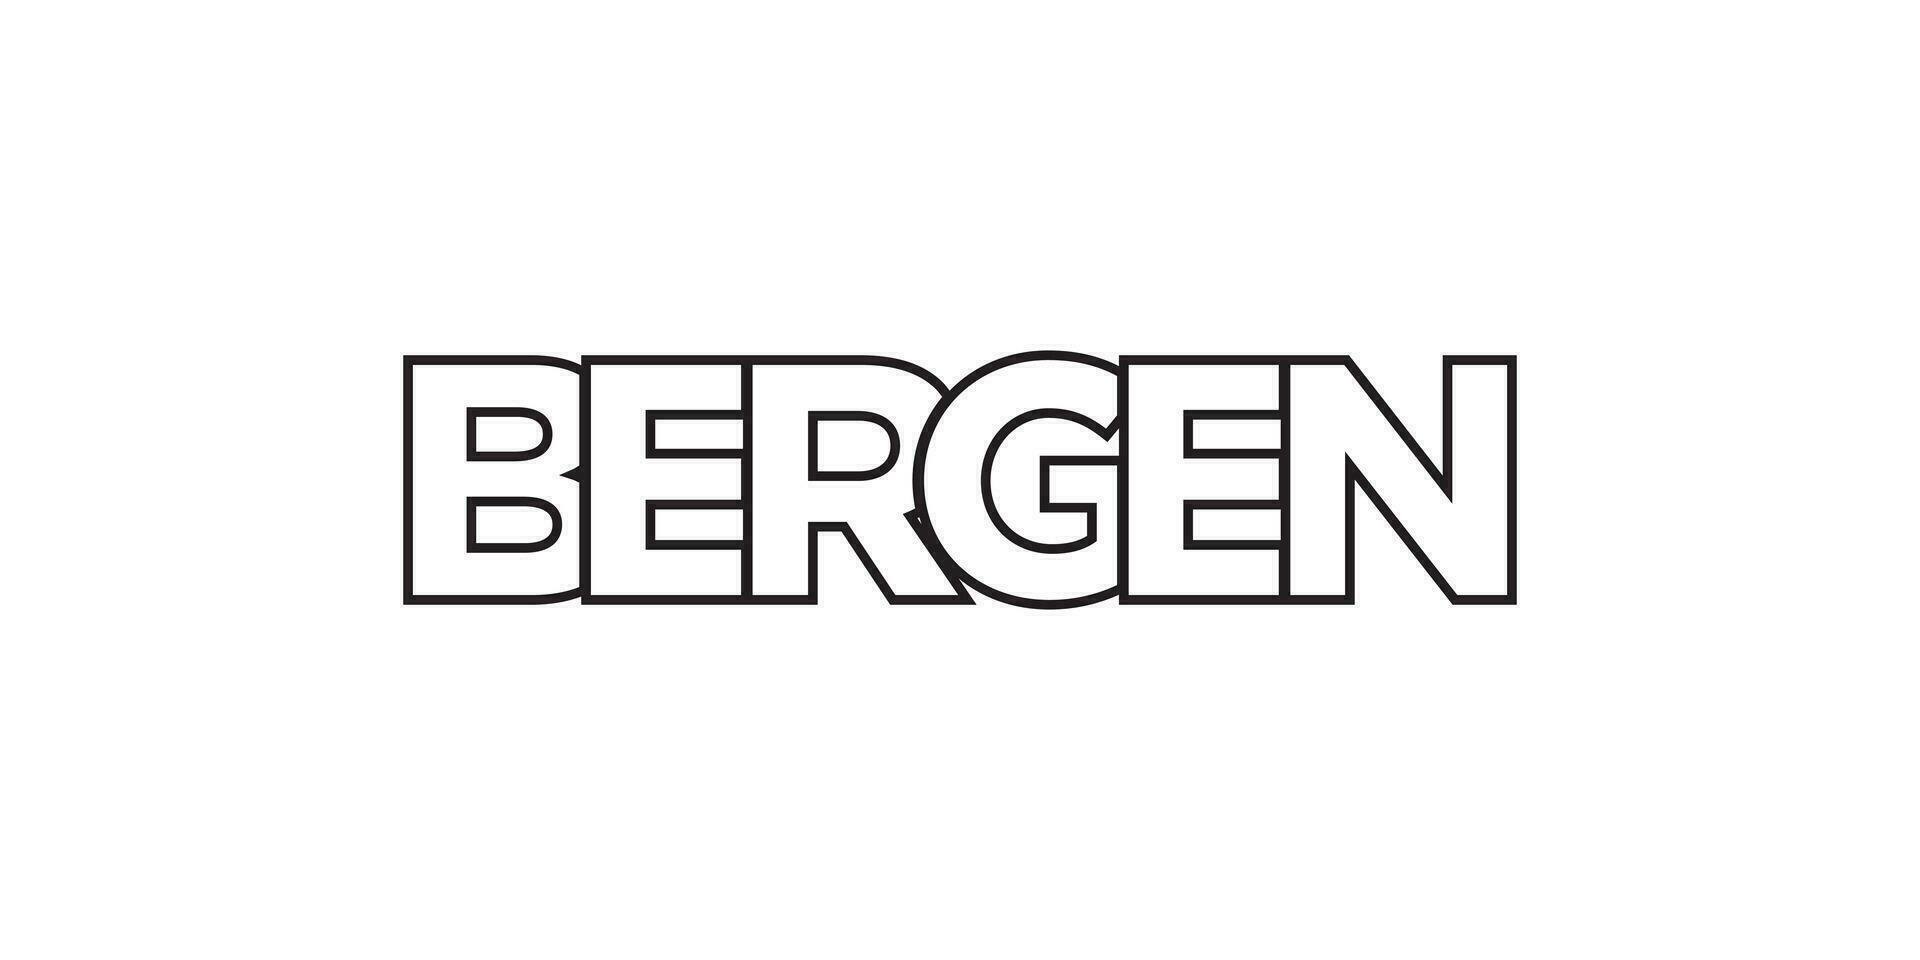 Bergen in the Norway emblem. The design features a geometric style, vector illustration with bold typography in a modern font. The graphic slogan lettering.